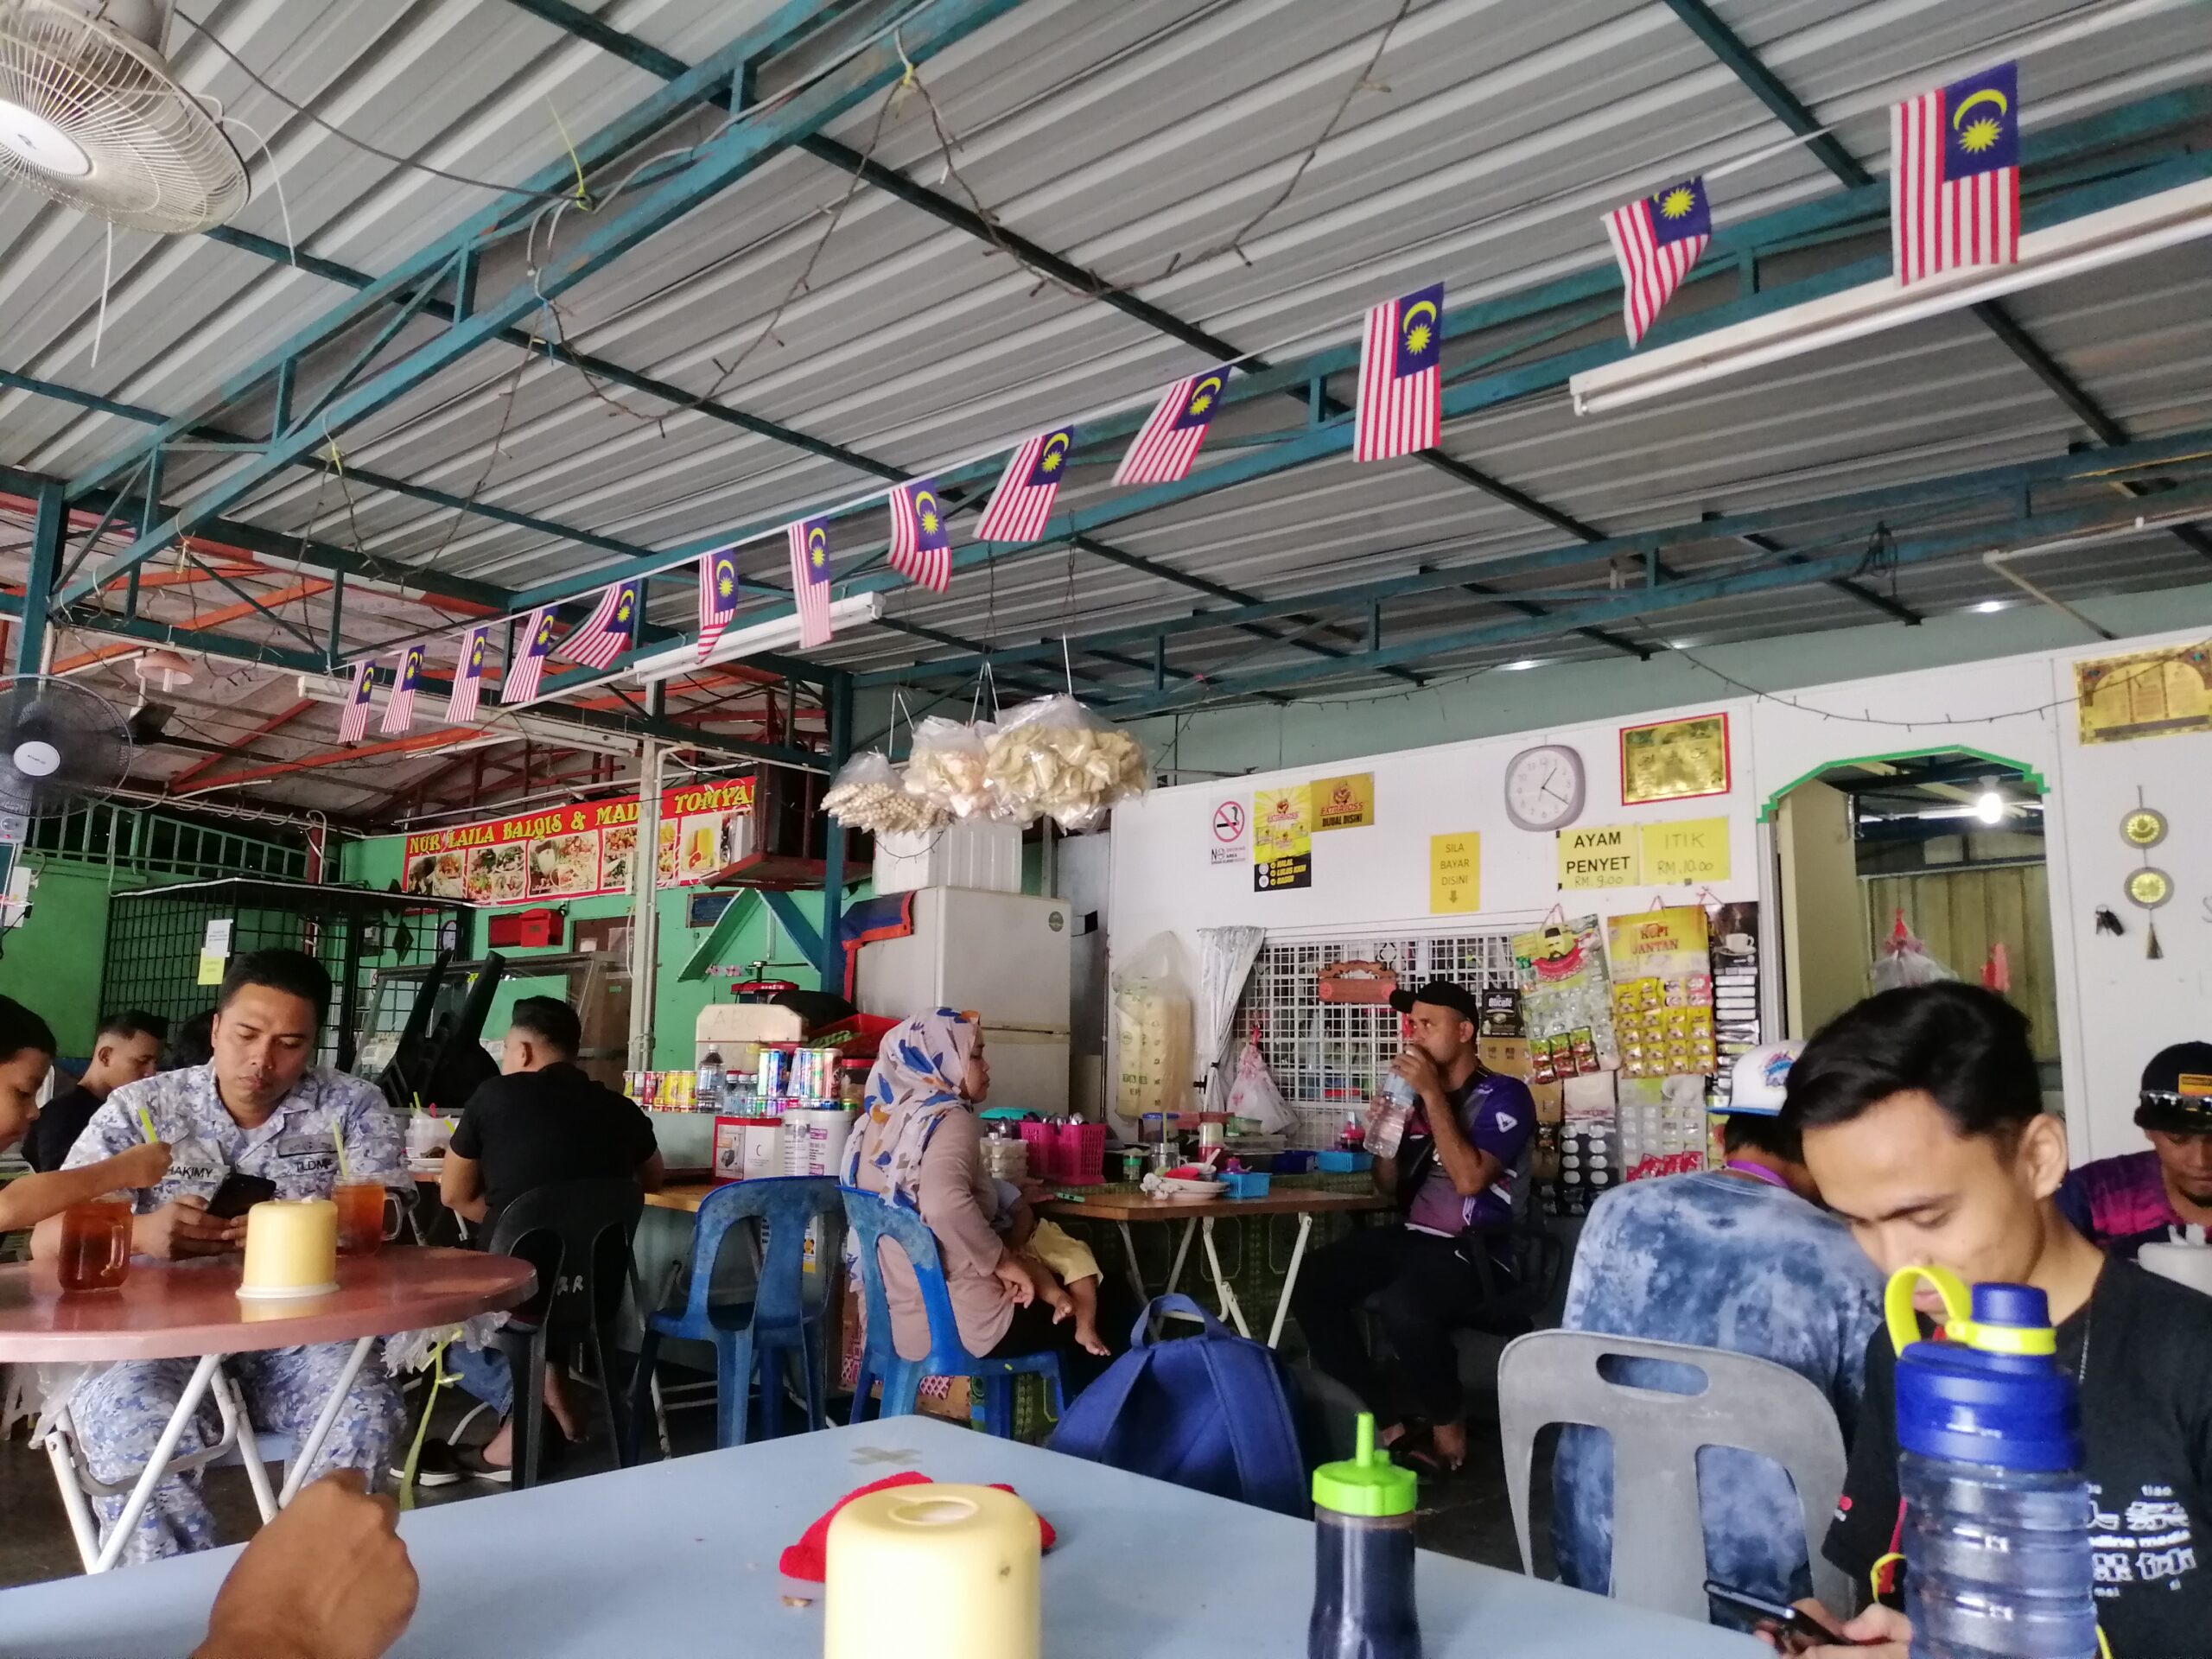 Randomly eating at this Shabby-Looking Sungai Besi Ayam Penyet Store and it was OK